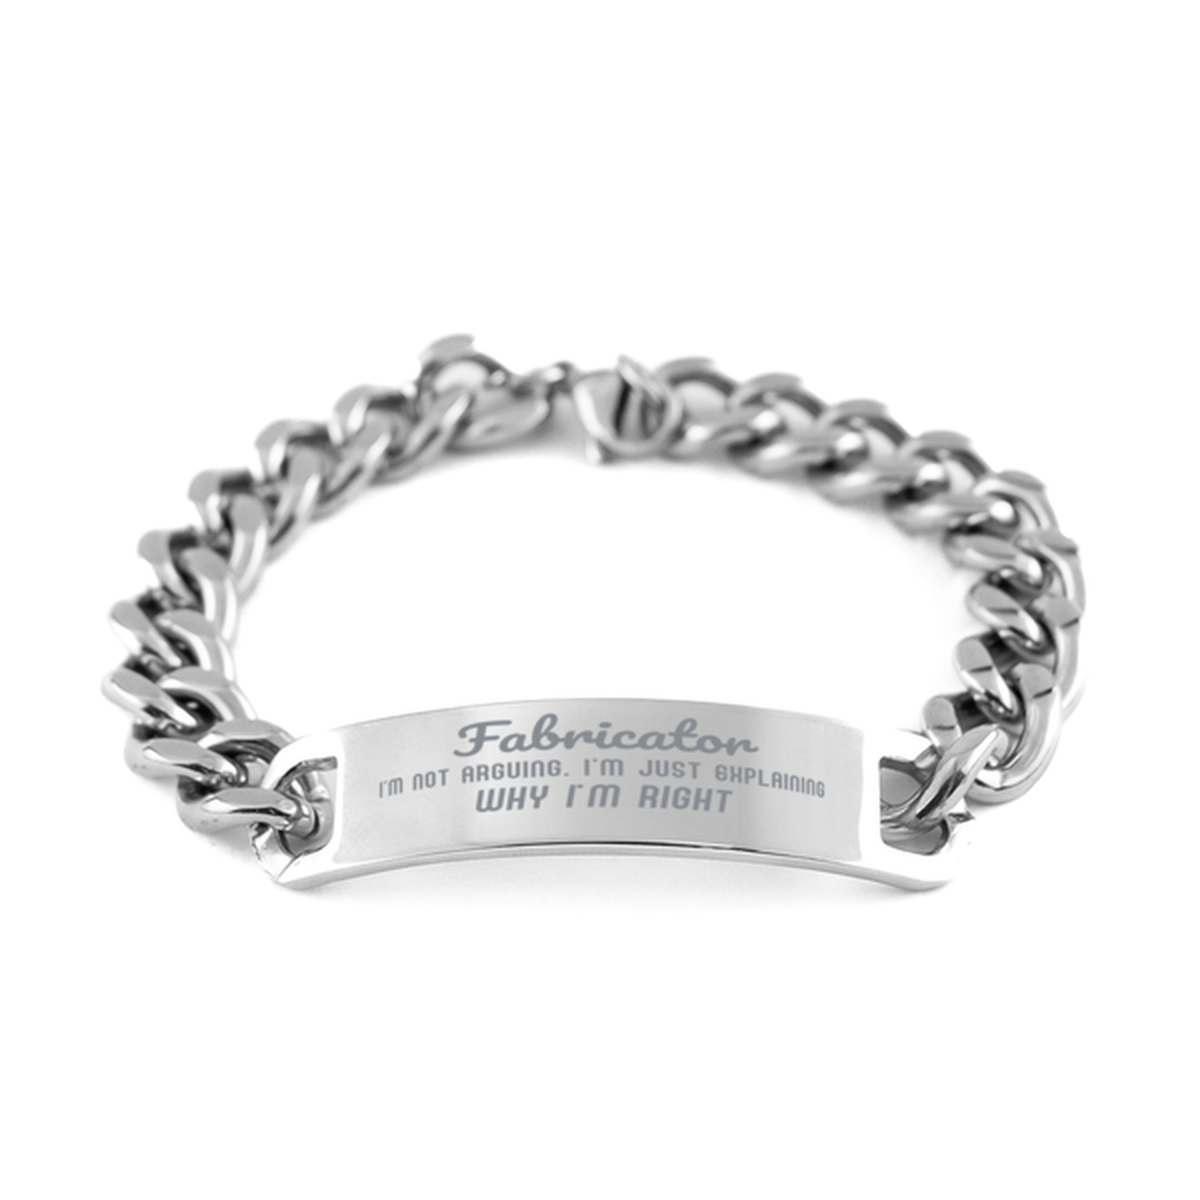 Fabricator I'm not Arguing. I'm Just Explaining Why I'm RIGHT Cuban Chain Stainless Steel Bracelet, Graduation Birthday Christmas Fabricator Gifts For Fabricator Funny Saying Quote Present for Men Women Coworker